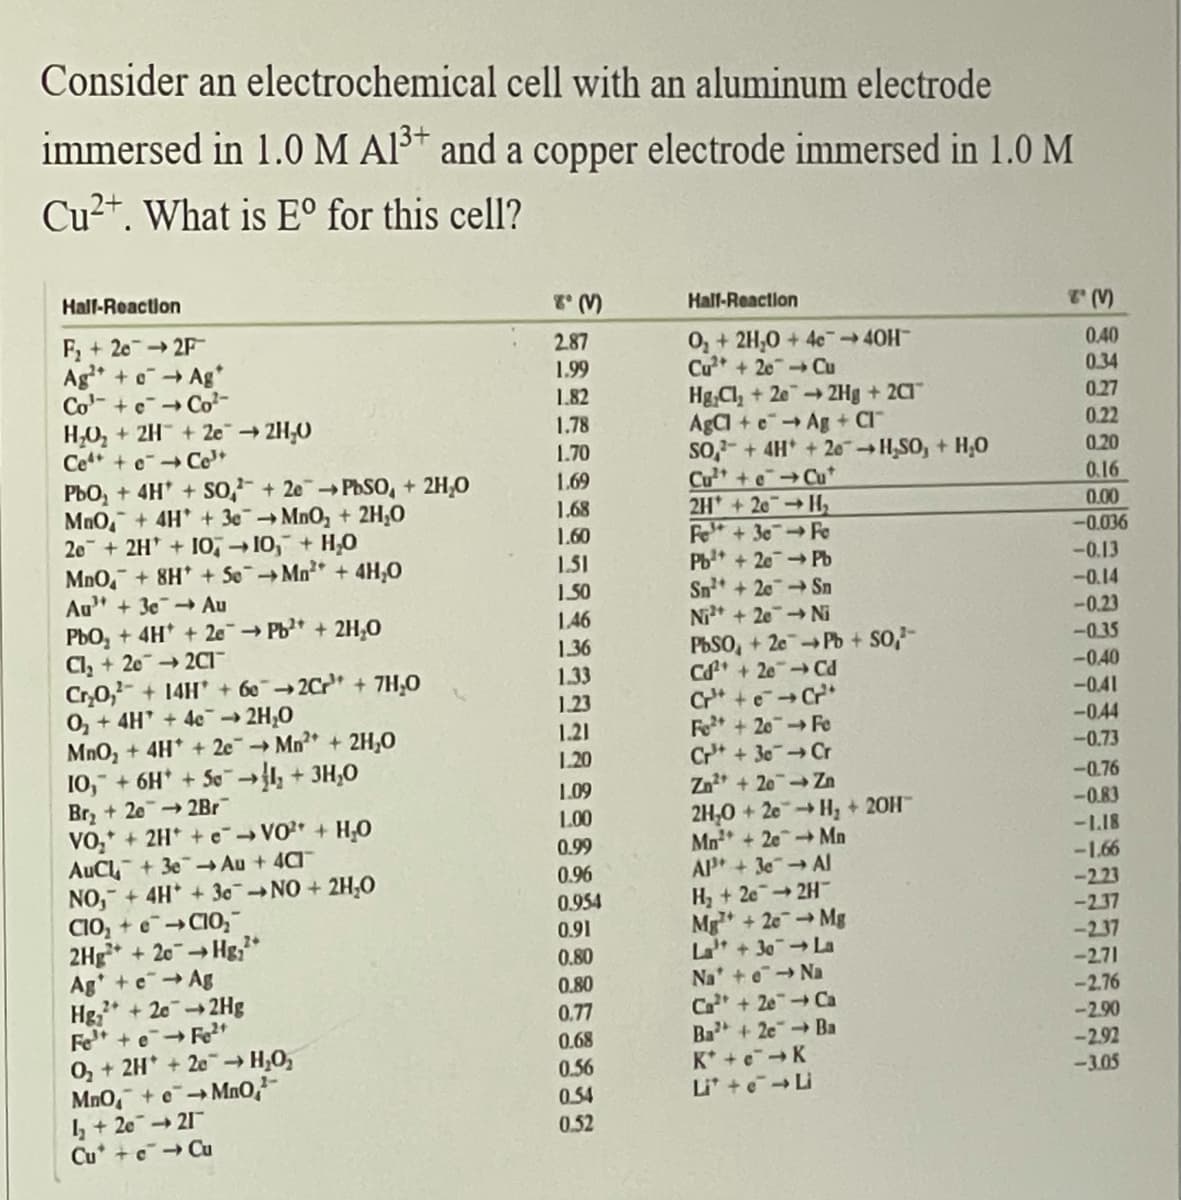 Consider an electrochemical cell with an aluminum electrode
immersed in 1.0 M Al³* and a copper electrode immersed in 1.0 M
Cu2*. What is E° for this cell?
Hall-Reaction
Hall-Reaction
T(V)
F, + 20 2F
Ag* + oAg*
Co-+eCo-
H,O, + 2H + 2e2H,0
Ce + eCe*
PbO, + 4H + So,²- + 2ePbSo, + 2H,0
MnO, + 4H + 3e→ MnO, + 2H,0
20 + 2H + IO, → 10, + H,0
MnO, + 8H* + SeMn"+4H;0
Au" + 3e Au
PbO, + 4H + 2e→ Pb + 2H,0
Cl, + 202CI
Cr,0,- + 14H + 6e2Cr + 7H,0
0, + 4H + 4e 2H,0
MnO, + 4H + 2c Mn + 2H,0
10, + 6H + Se→, + 3H,0
Br, + 2e 2Br
VO,* + 2H + eVO? + H,O
AuCl + 3e - Au + 4C
NO, + 4H + 30 NO + 2H,0
CIO, + eC10,
2Hg* + 20Hg;*
Ag +eAg
+ 202HB
2.87
1.99
1.82
0+2H,0 + 4e 40H-
Cu + 20CU
Hg Cl, + 2e 2Hg + 2C1¯
AgCl+ eAg + CI"
So-+ 4H +20H,SO, + H,0
Cu + e→Cu*
2H +20 H
Fe +3eFe
Pb +2ePb
Sn +2eSn
Ni + 2e Ni
PbSO, + 2ePb + So,
C + 2e Ca
Cr* +eCr*
Fe+ 2e Fe
Cr* + 30Cr
0.40
0.34
0.27
1.78
0.22
1.70
0.20
1.69
0.16
1.68
1.60
1.51
0.00
-0.036
-0.13
150
-0.14
1.46
-0.23
-0.35
1.36
1.33
1.23
1.21
1.20
-0.40
-0.41
-0.44
-0.73
-0.76
Zn + 20 Zn
2H,0 + 2eH, + 20H
Mn +2e Mn
AP + 3eAlI
H, + 2e2H
Mg+ 20ME
La +30LA
Na +eNa
Ca + 2e Ca
Ba + 2eBa
1.09
L.00
-0.83
0.99
-L18
-1.66
-223
0.96
0.954
0.91
0.80
-2.71
0.80
Hg,*
Fe + eFe4
0, + 2H* + 2e H,O,
Mno, + eMno,-
L + 2e 21
Cu +e Cu
-2.76
0.77
-2.90
-2.92
-3.05
0.68
0.56
0.54
0.52
K* +eK
Li +eLi
